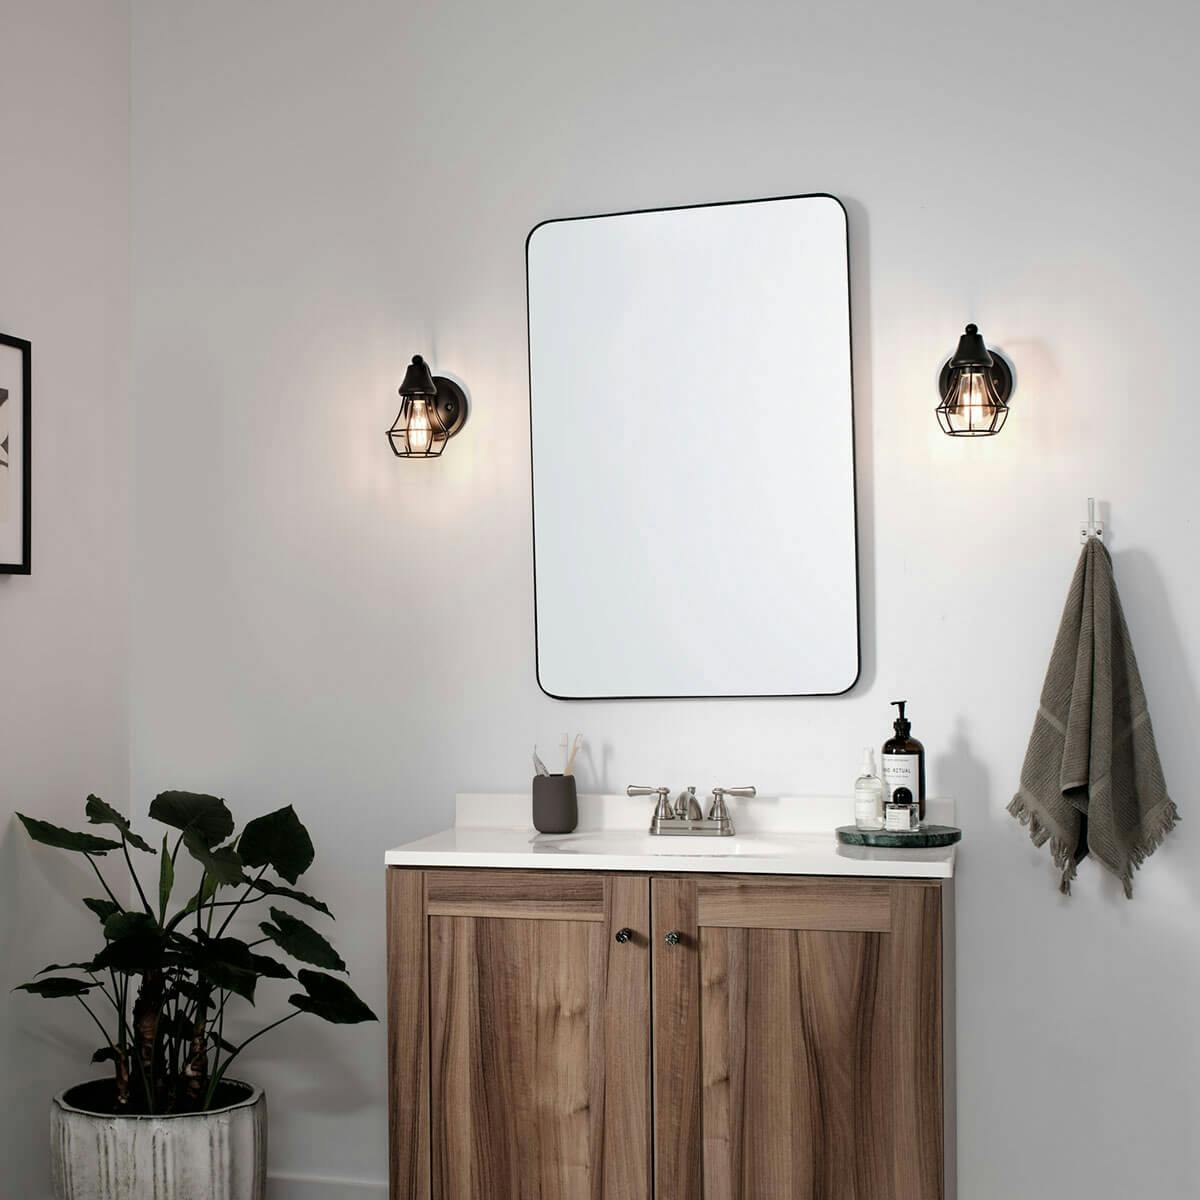 Day time Bathroom featuring Bayley vanity light 37512BK